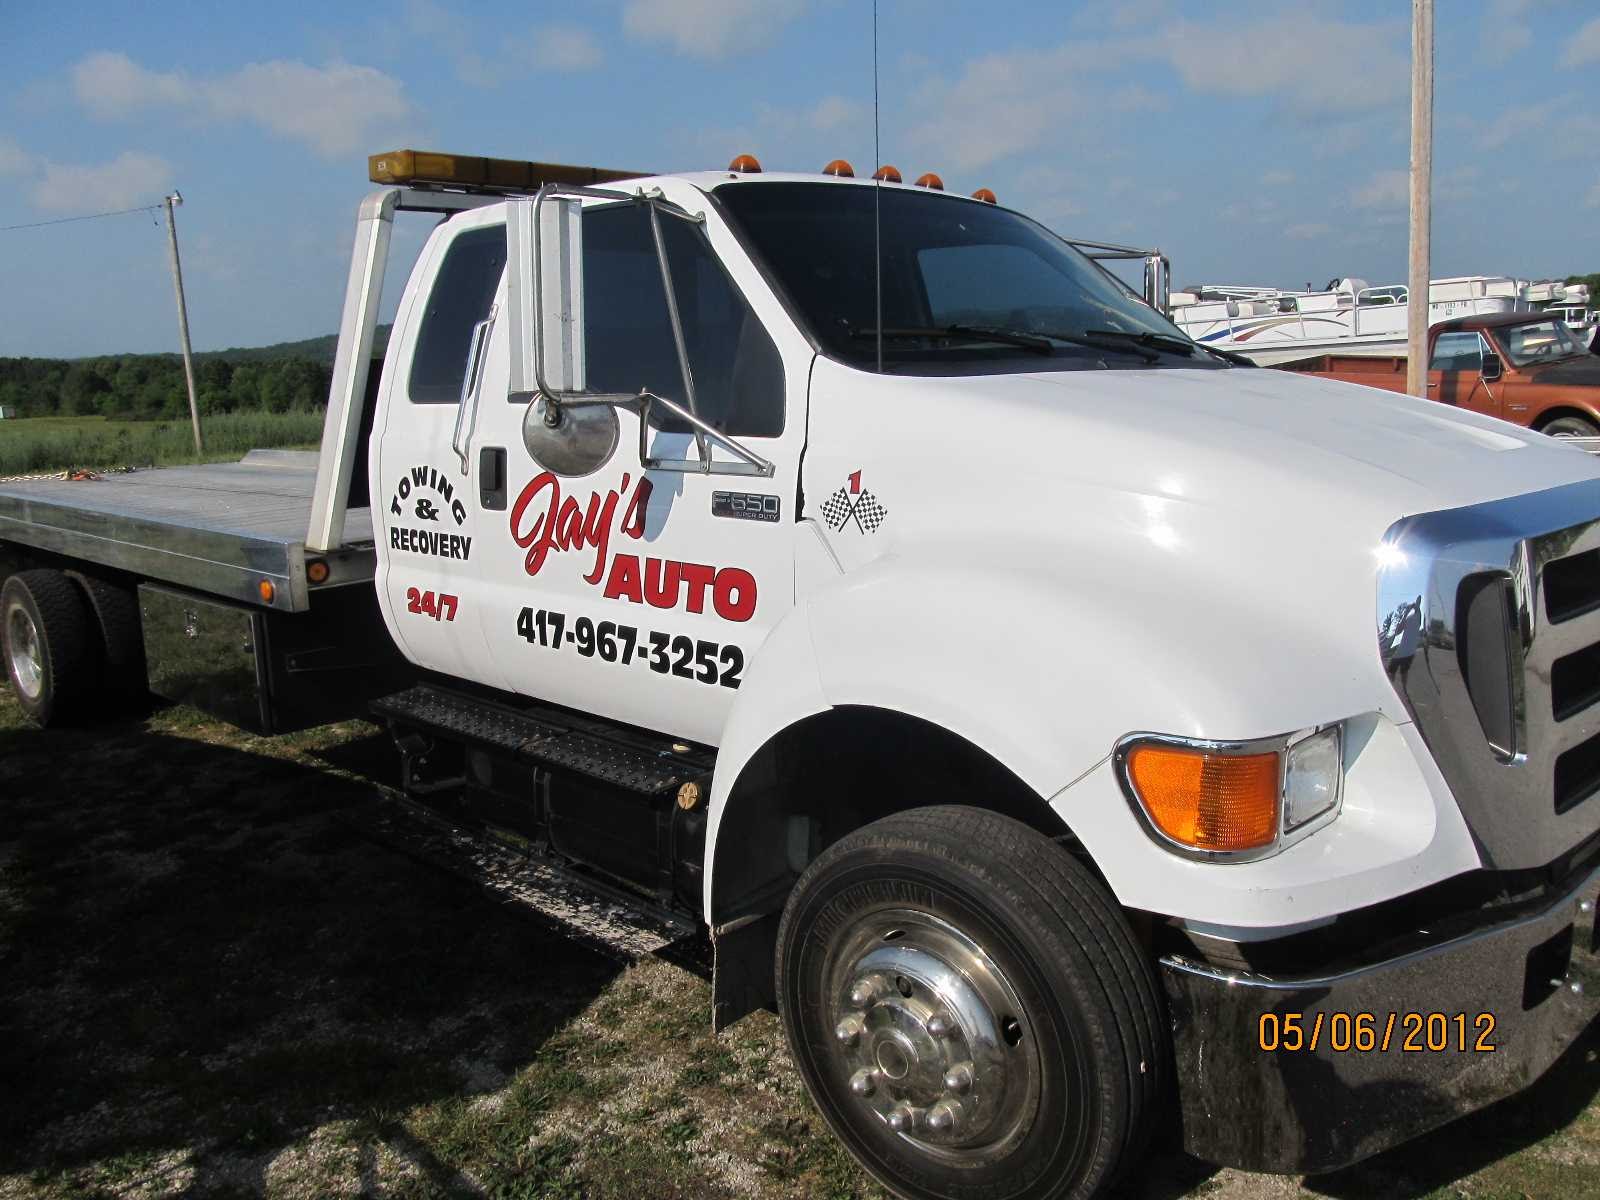 Jay's Automotive & Towing